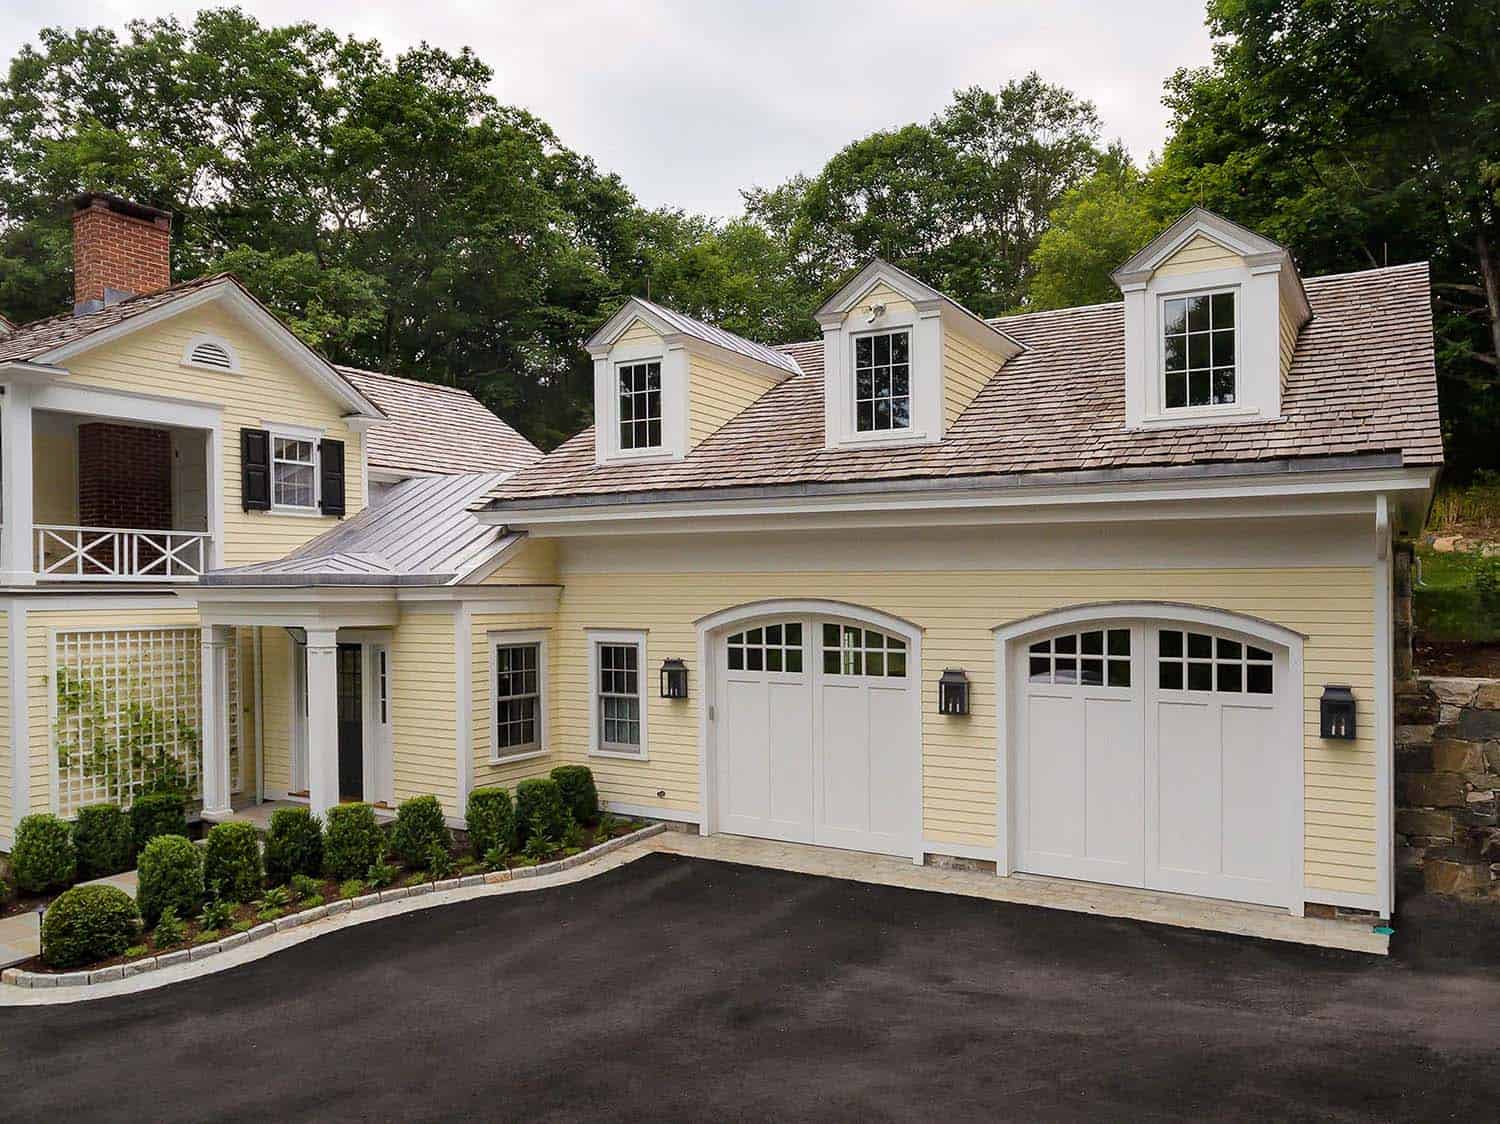 transitional style country home exterior garage view